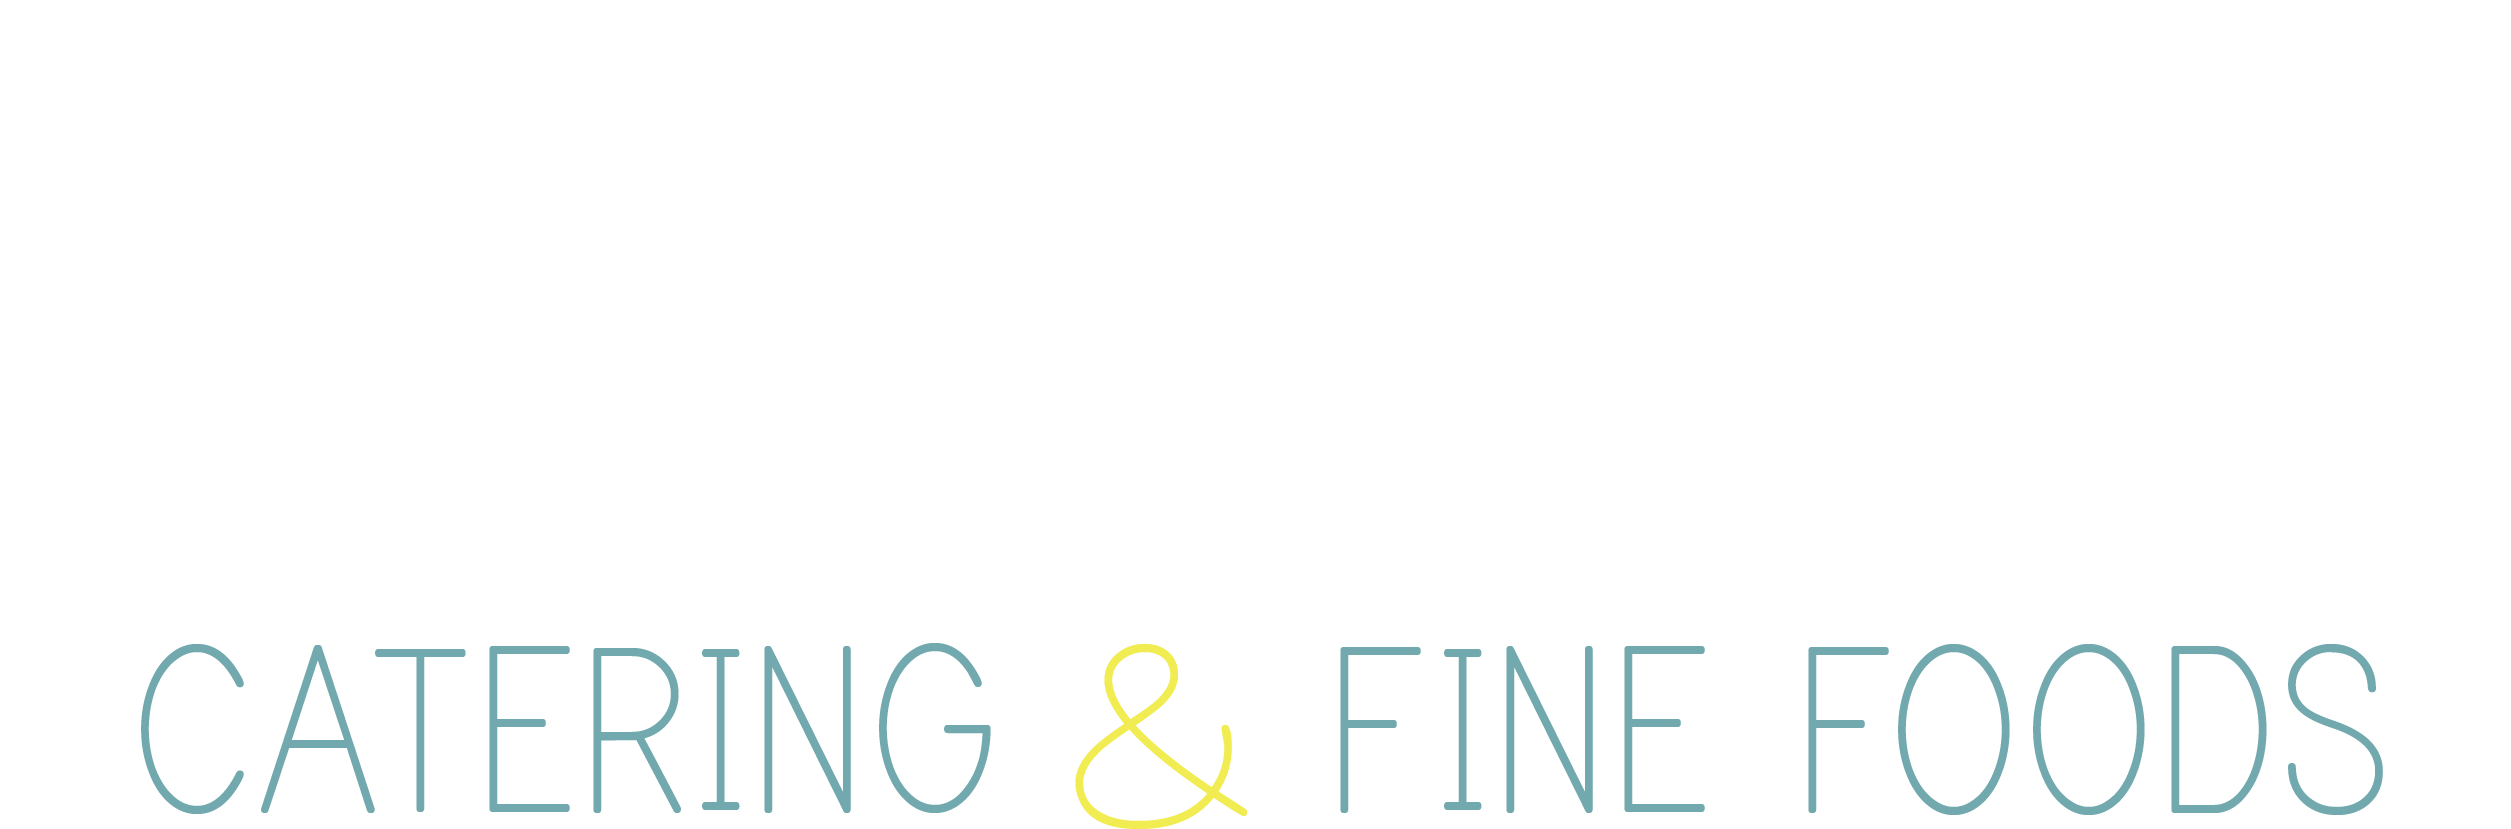 Cobblestone Catering Fine Foods Logo PNG